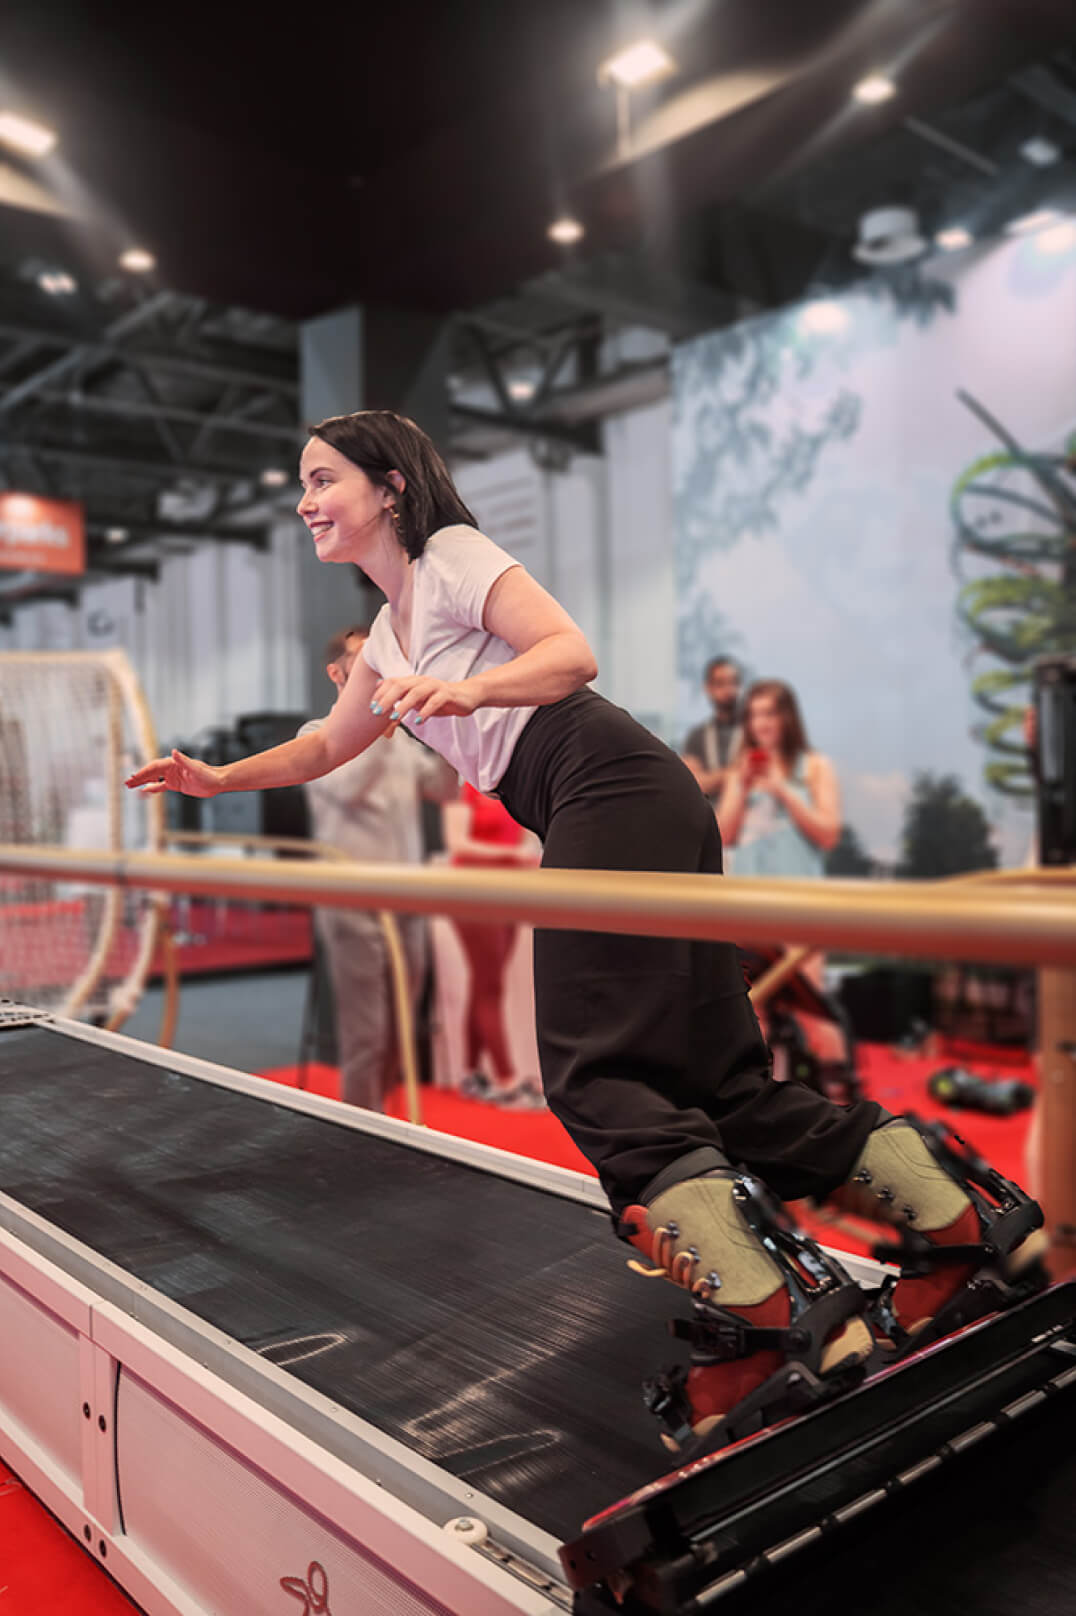 SkyTechSport ski simulators are perfect for entertainment centers and gyms